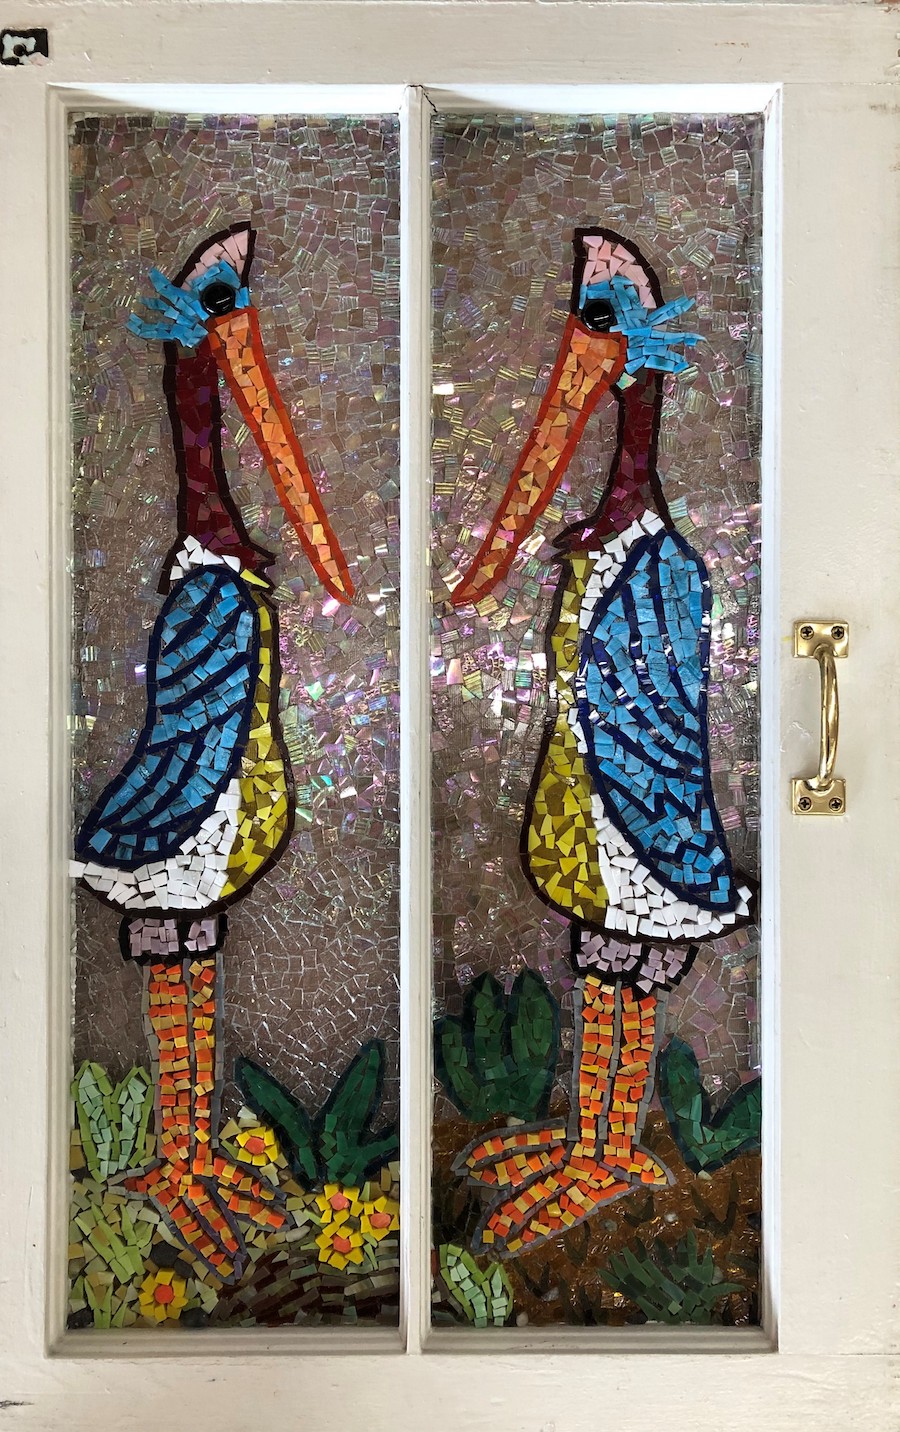 A mosaic of two colorful birds, with long features, facing each other.